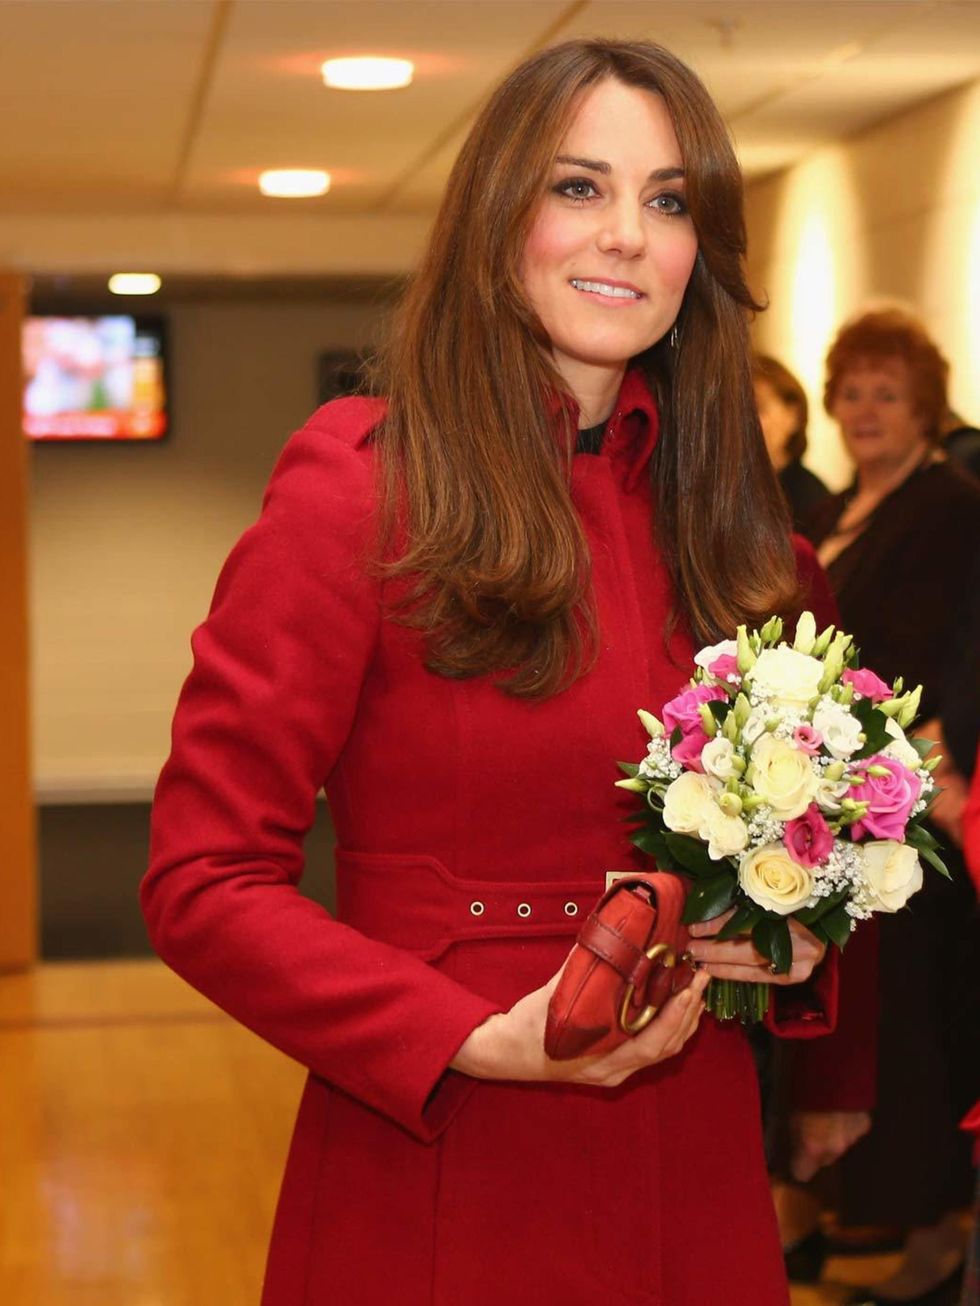 <p><a href="http://www.elleuk.com/star-style/celebrity-style-files/kate-middleton">Kate Middleton</a> wears a red LK Bennett coat with a matching <a href="http://www.elleuk.com/catwalk/designer-a-z/gucci/spring-summer-2013">Gucci</a> 1921 collection clutc